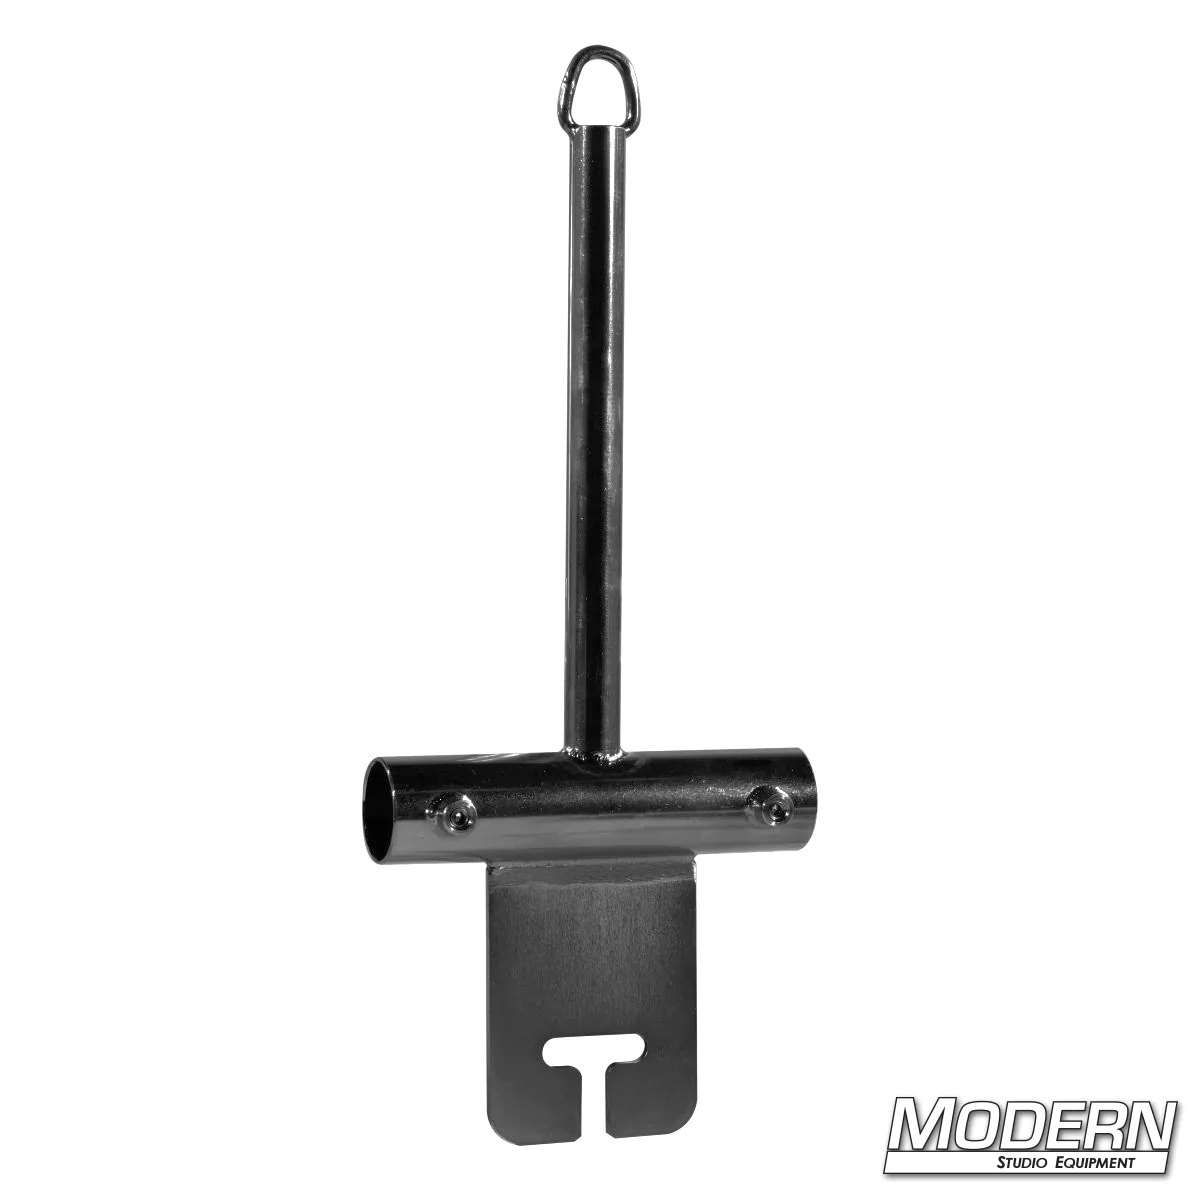 Center Boom Post with Ear for 1-1/4" Speed-Rail® - Black Zinc